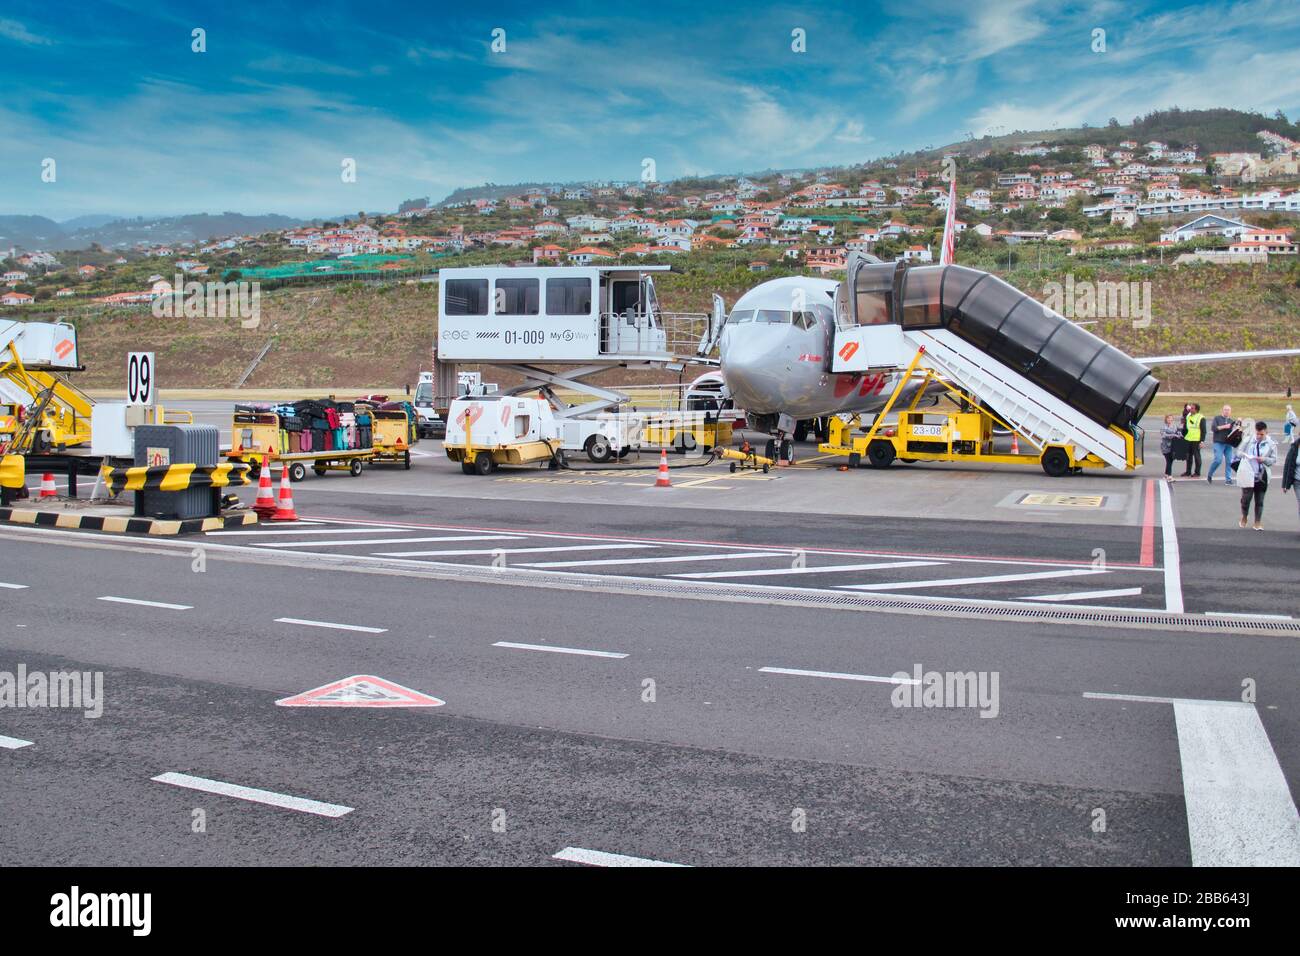 Tourists leave a Jet2 plane in Madeira while crews arrive to offload luggage and to fuel and service the plane ready for its next flight Stock Photo